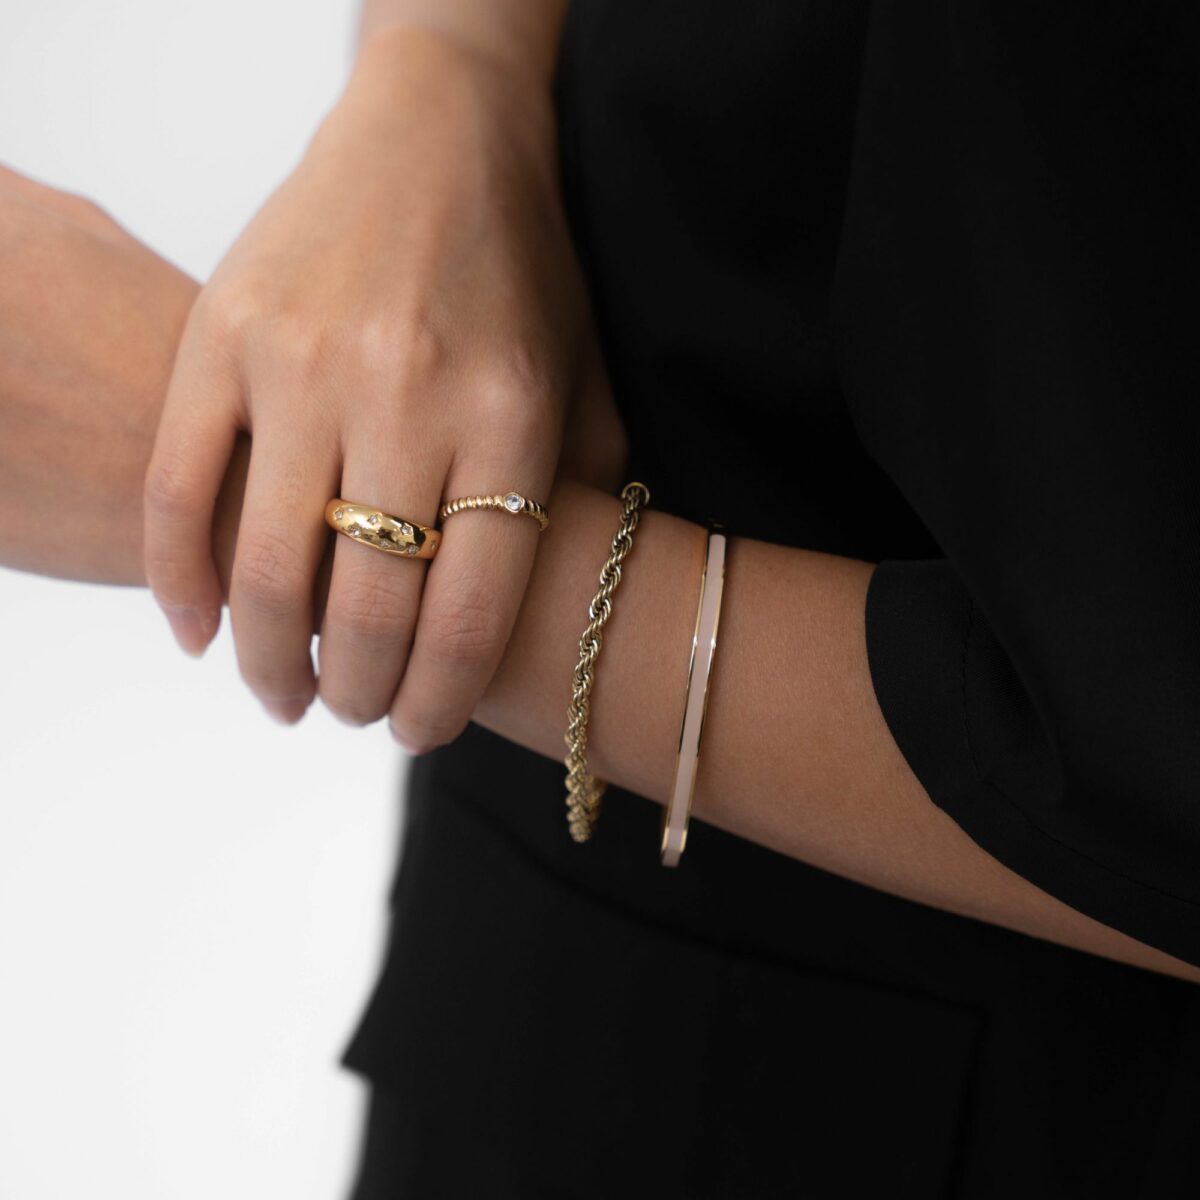 https://m.clubbella.co/product/14k-gold-plated-rope-chain-bracelet/ DSC00065